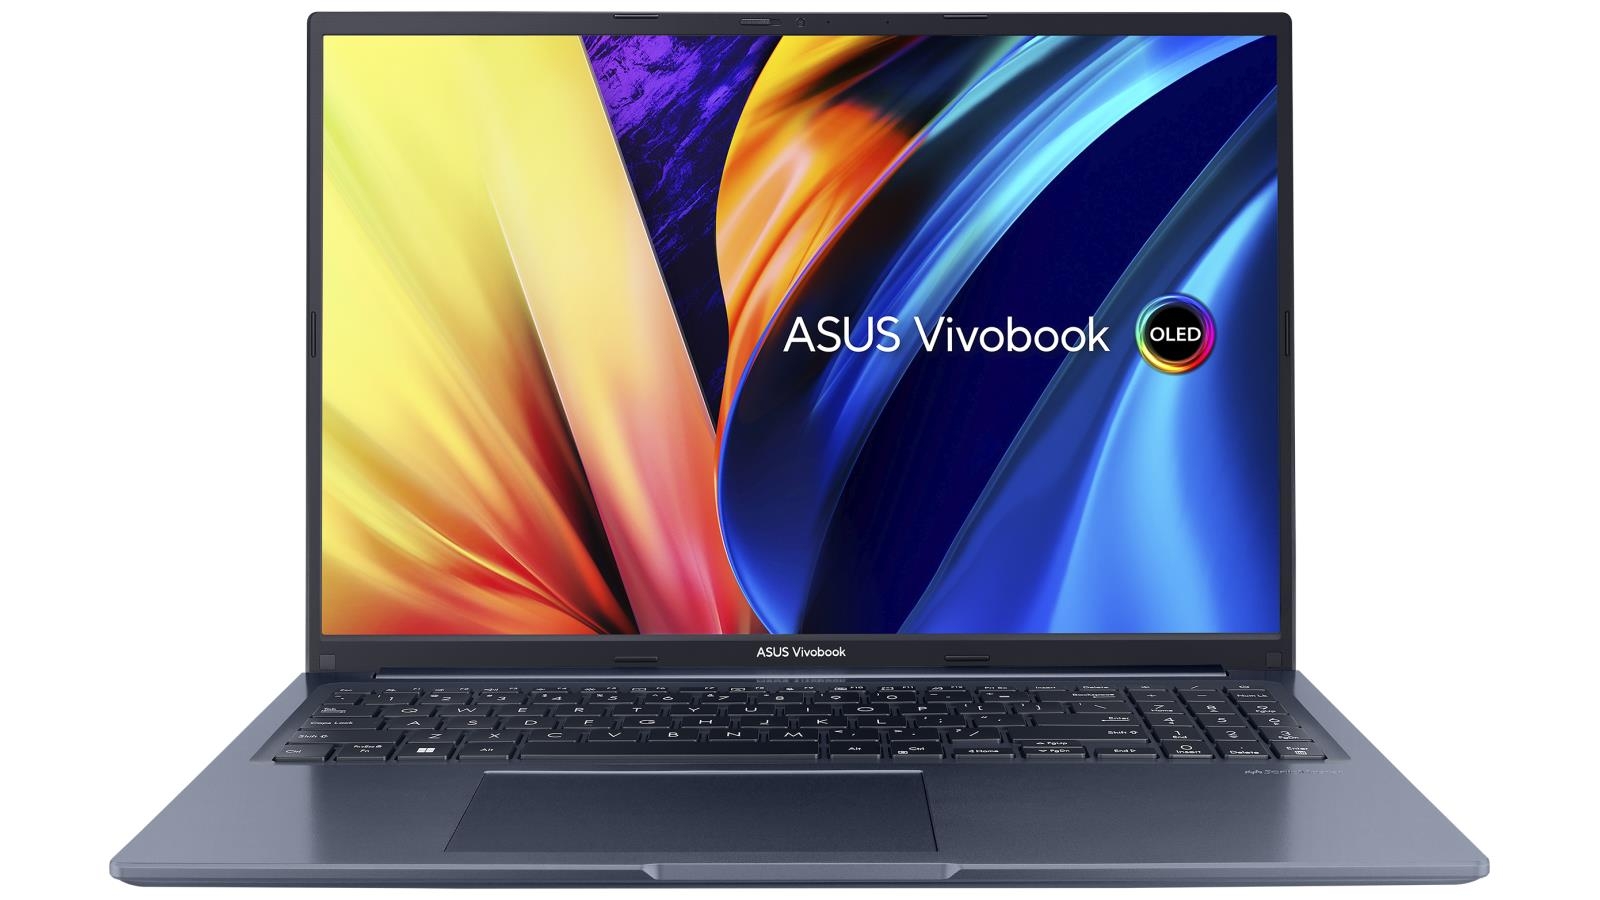 Save an Incredible $351 on a 16-inch Asus Vivobook Laptop, Today Only - CNET